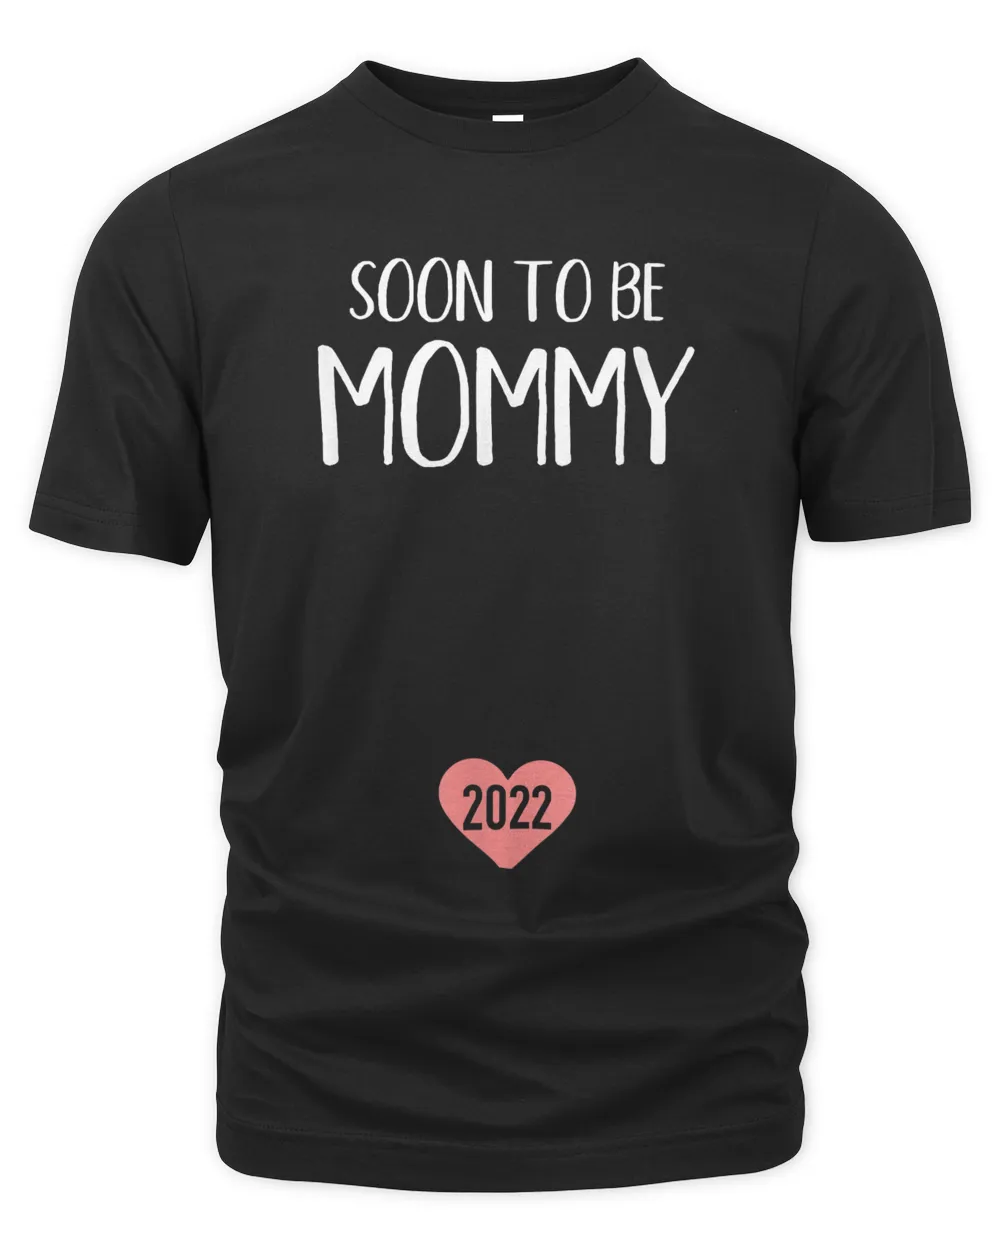 Soon to be mommy 2022 for new mom T-Shirt